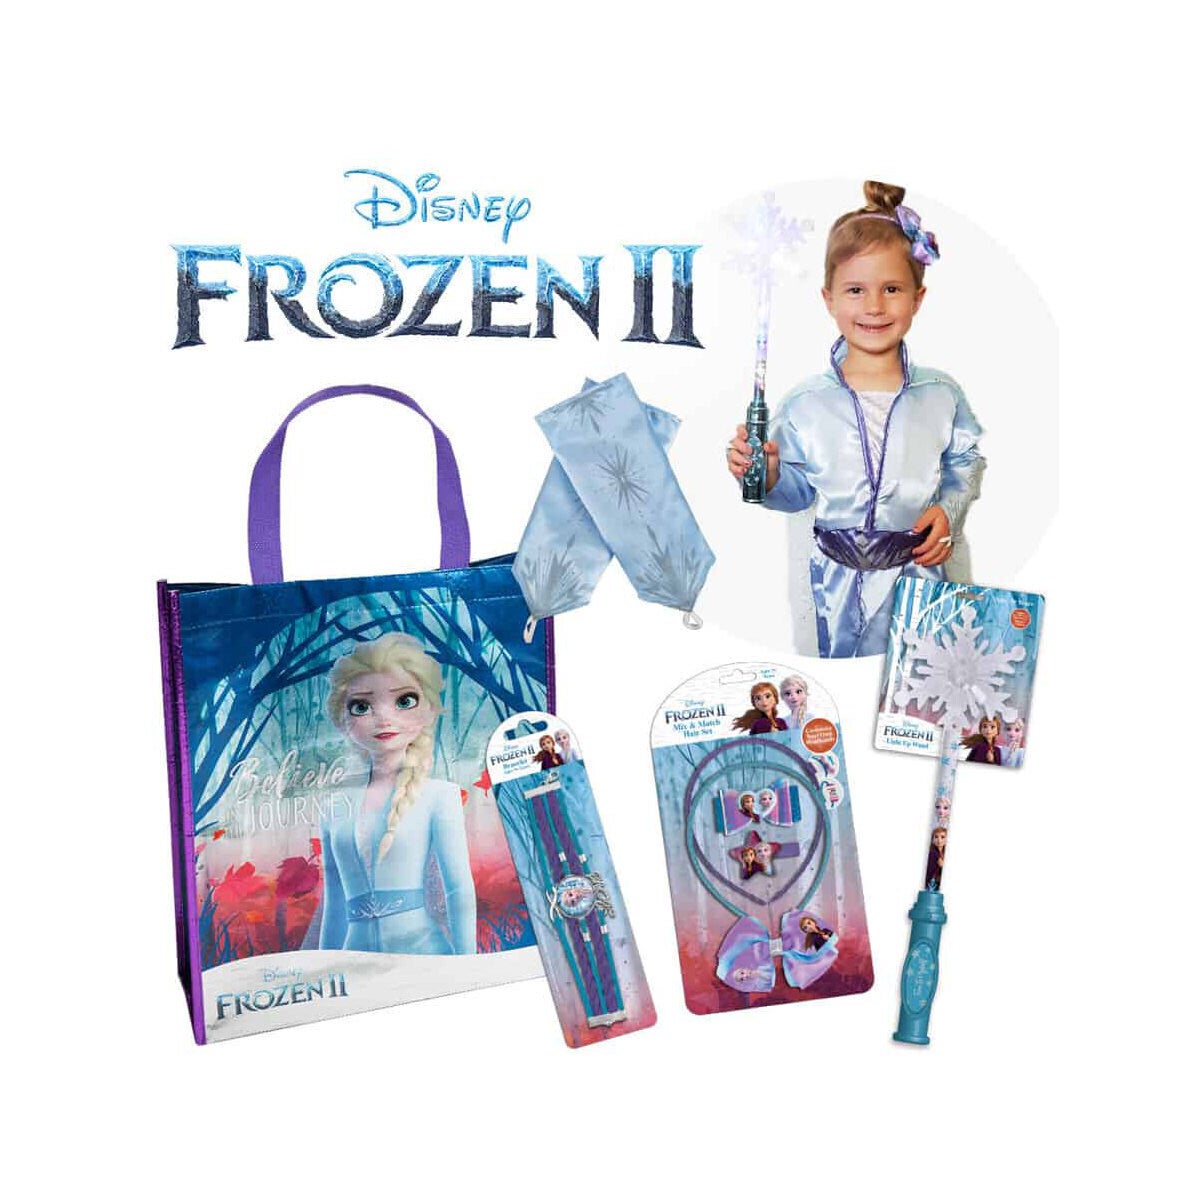 Frozen II Dress Up Showbag with Light Up Wand, Elsa Dress, Hair Set, Jewellery and Lots More